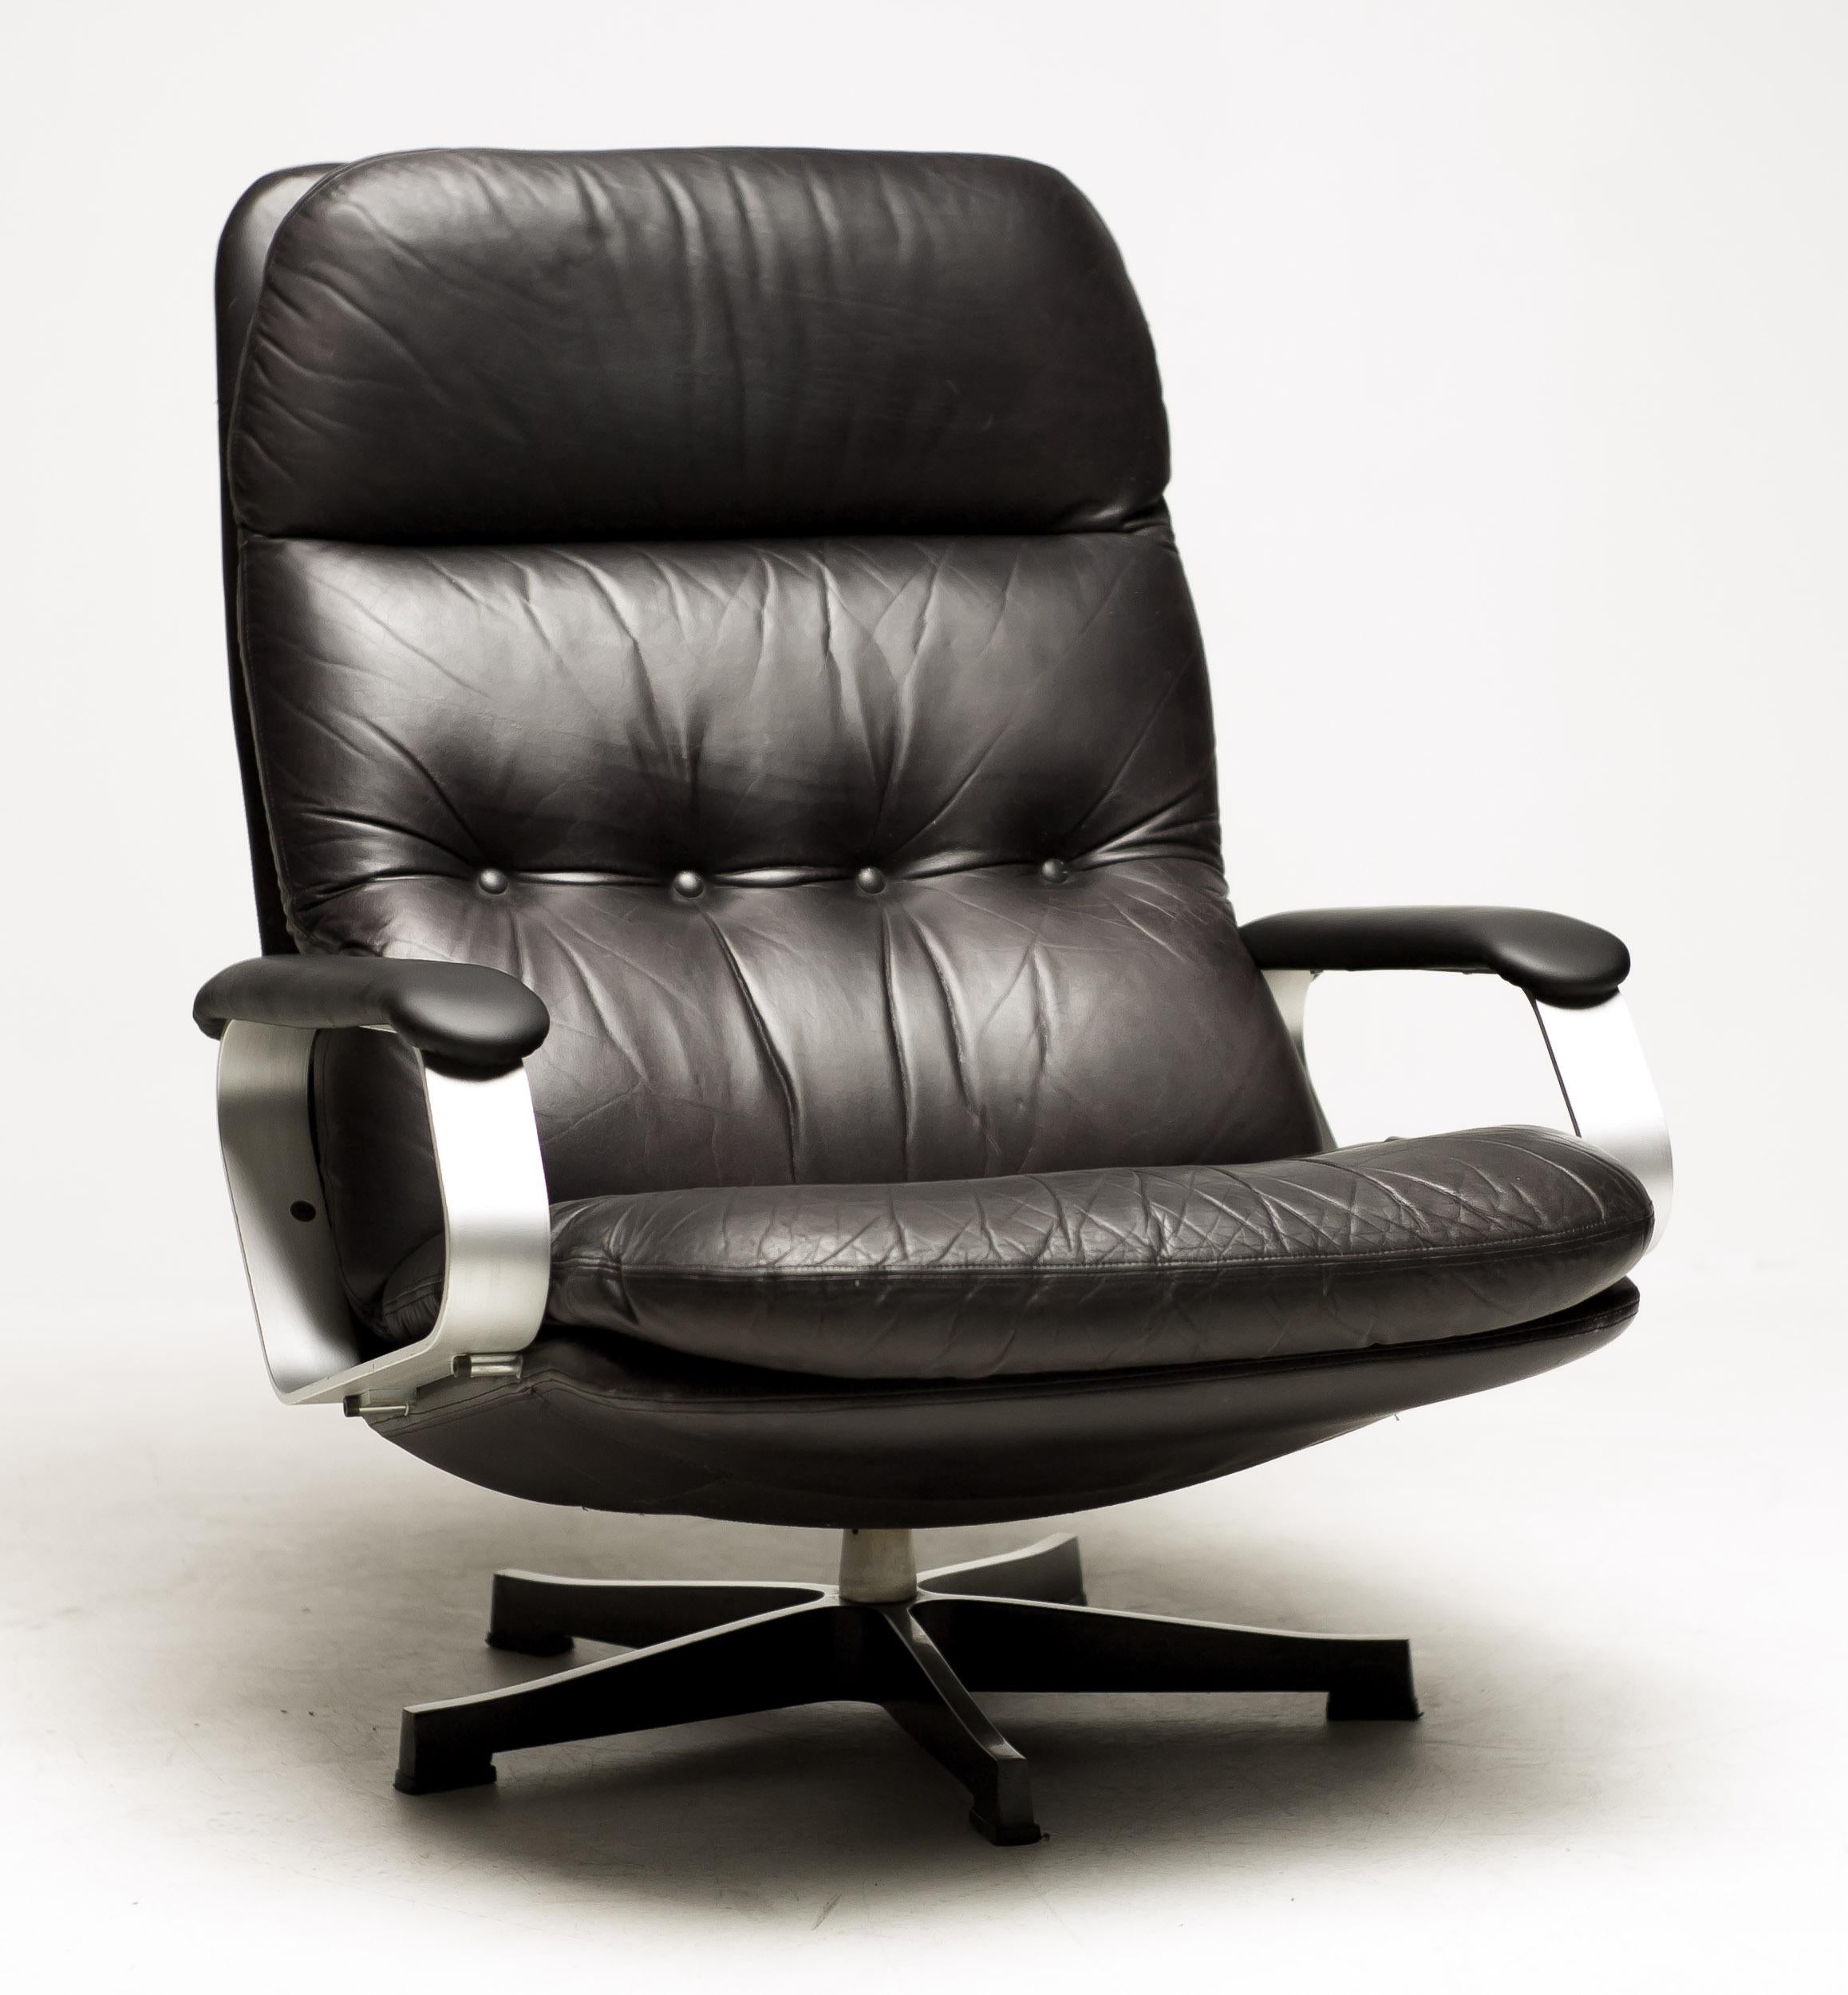 Very impressive and comfortable 1960s black leather lounge chair.
Aluminium swivel base and aluminum armrests upholstered in black leather.
The Eames lounge chair has a reputation for being comfortable, but this chair is really amazingly